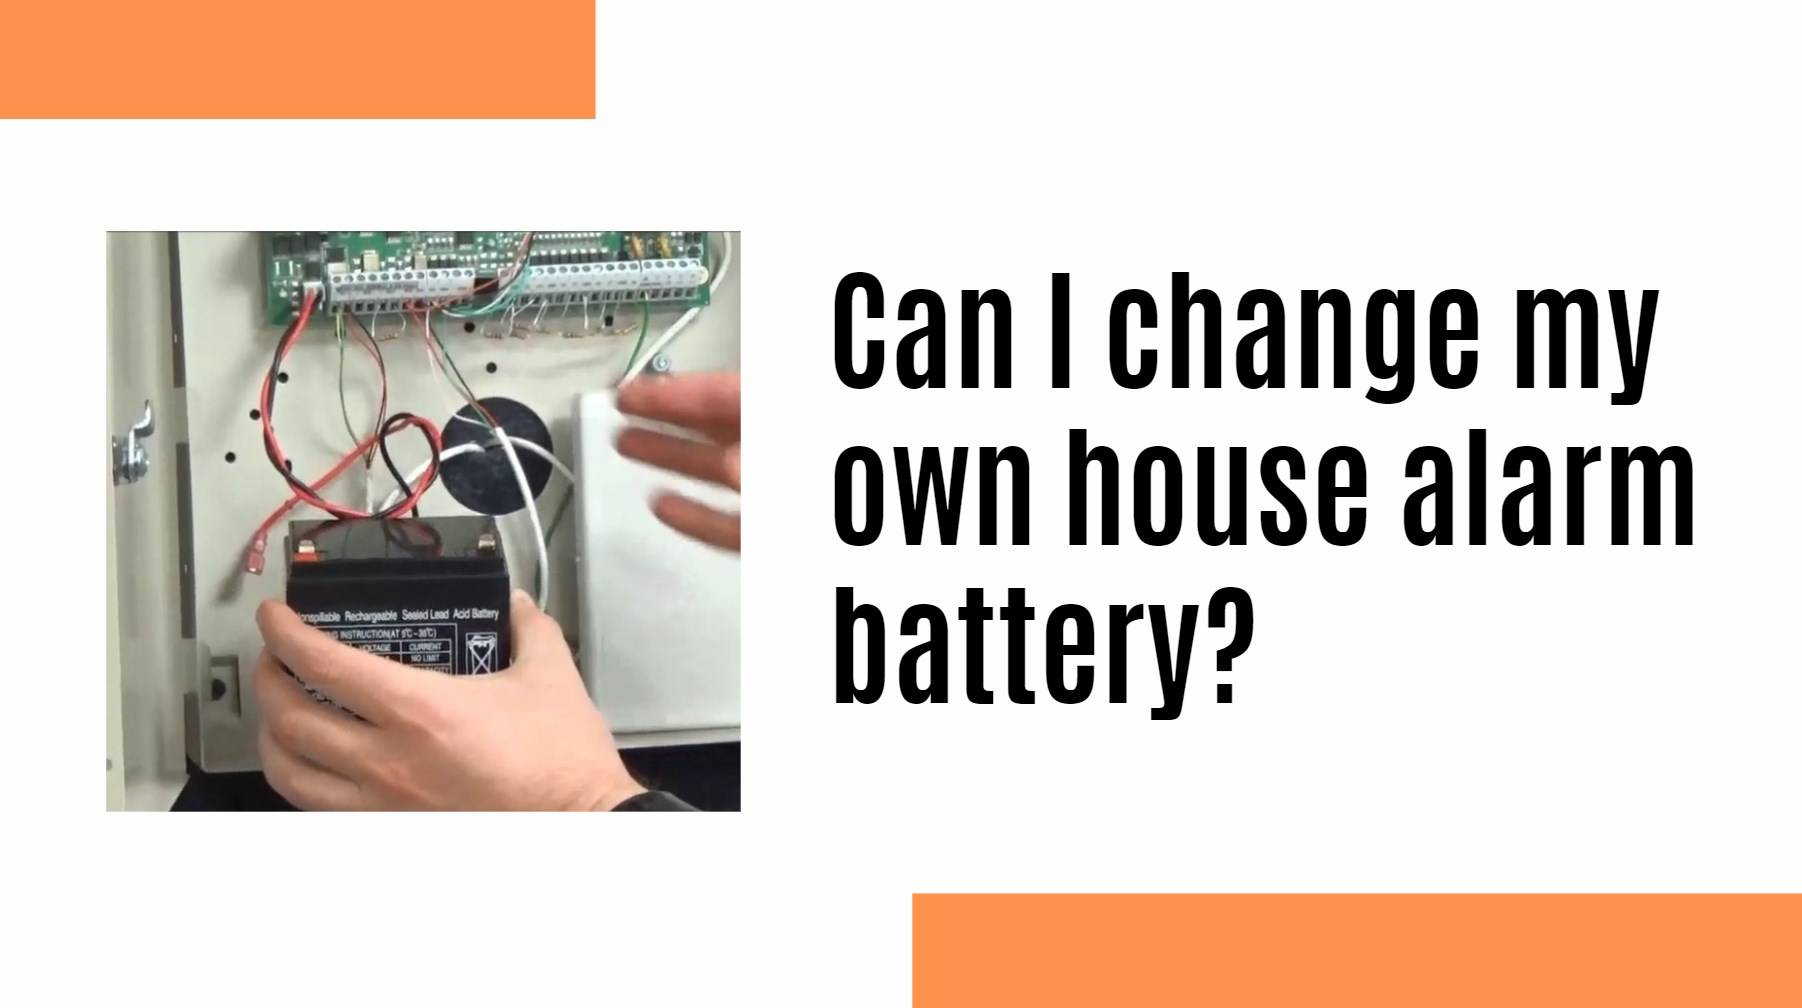 Can I change my own house alarm battery?